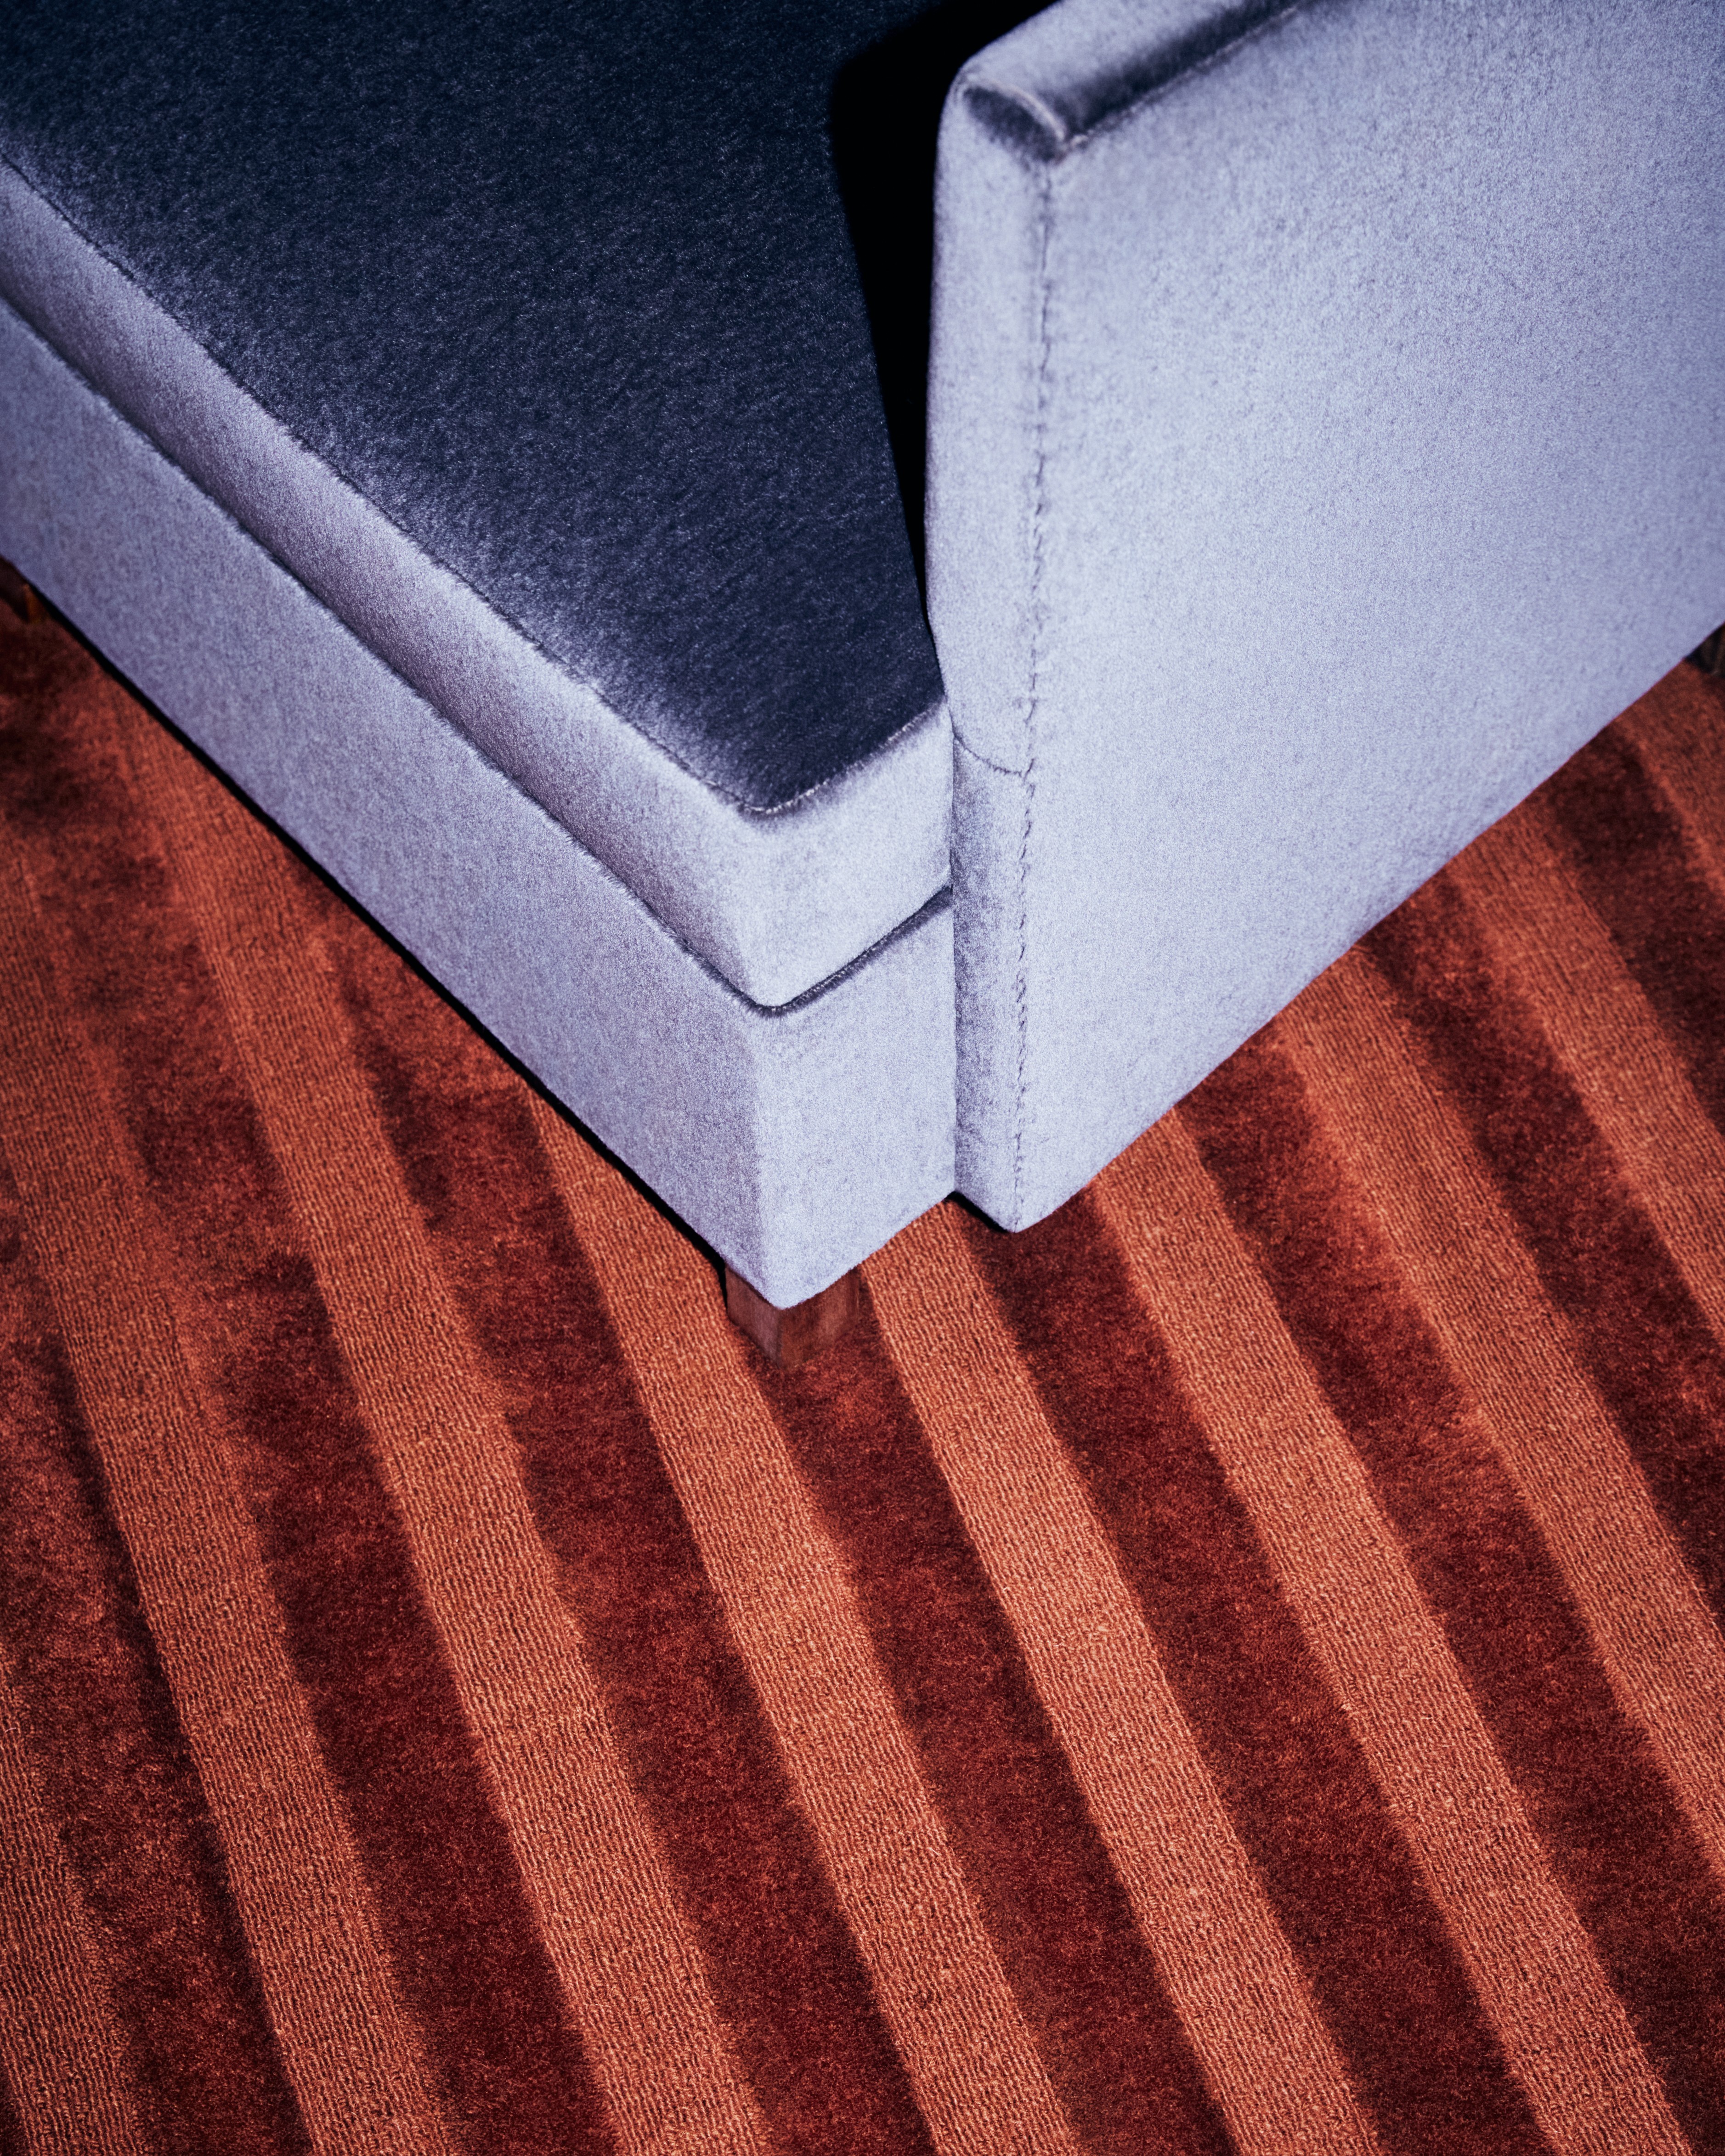 a close up of a couch on a wooden floor